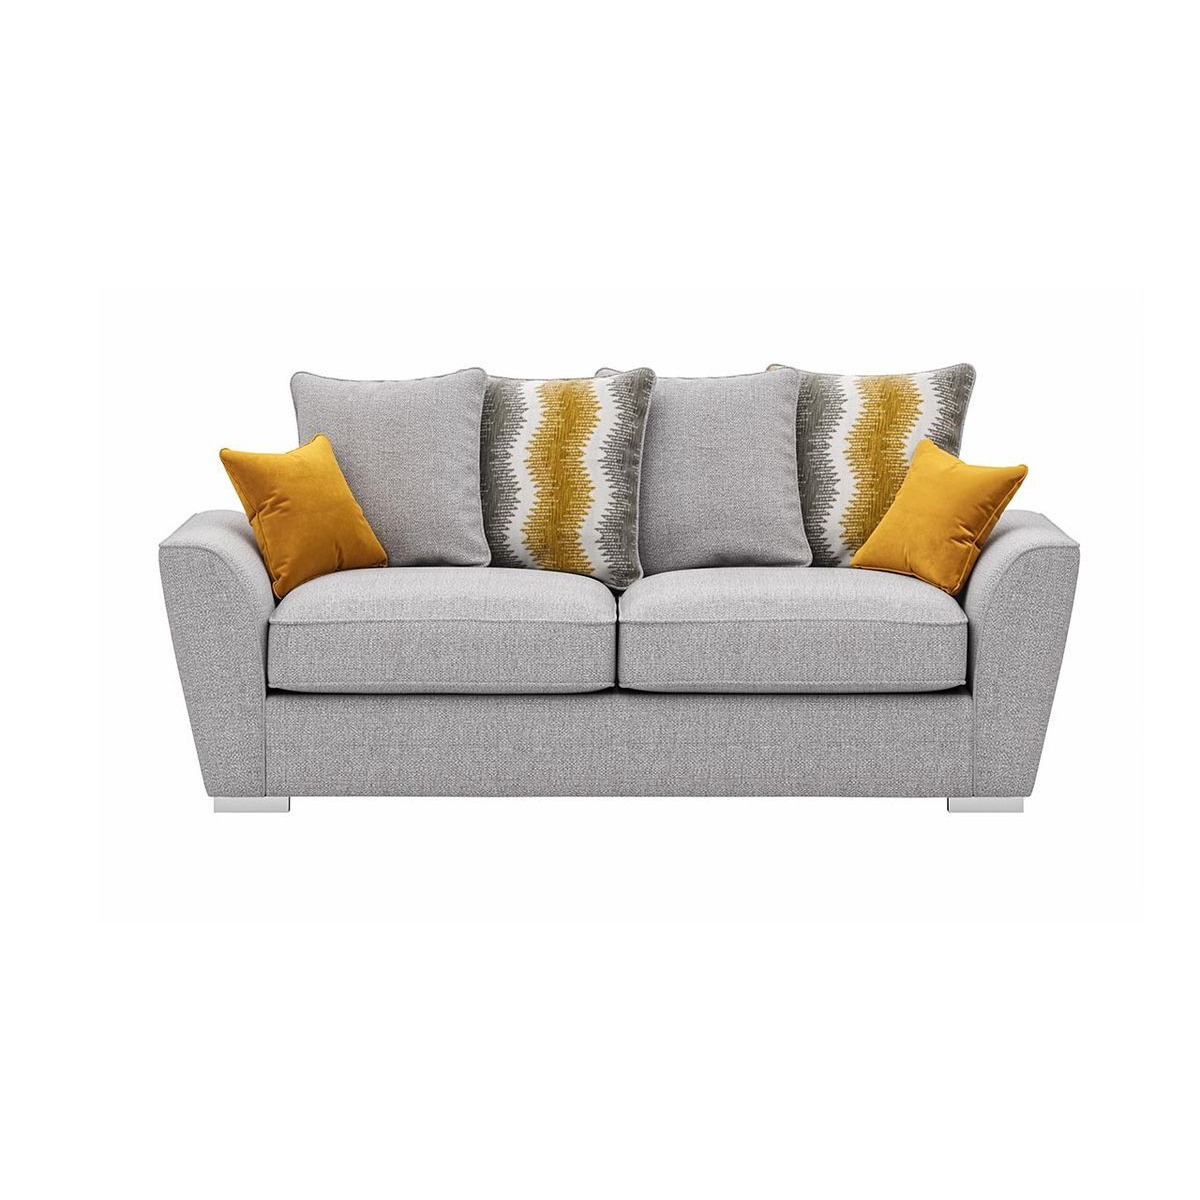 Majestic 3 Seater Sofa with Loose Back Cushions, light grey/mustard - image 1